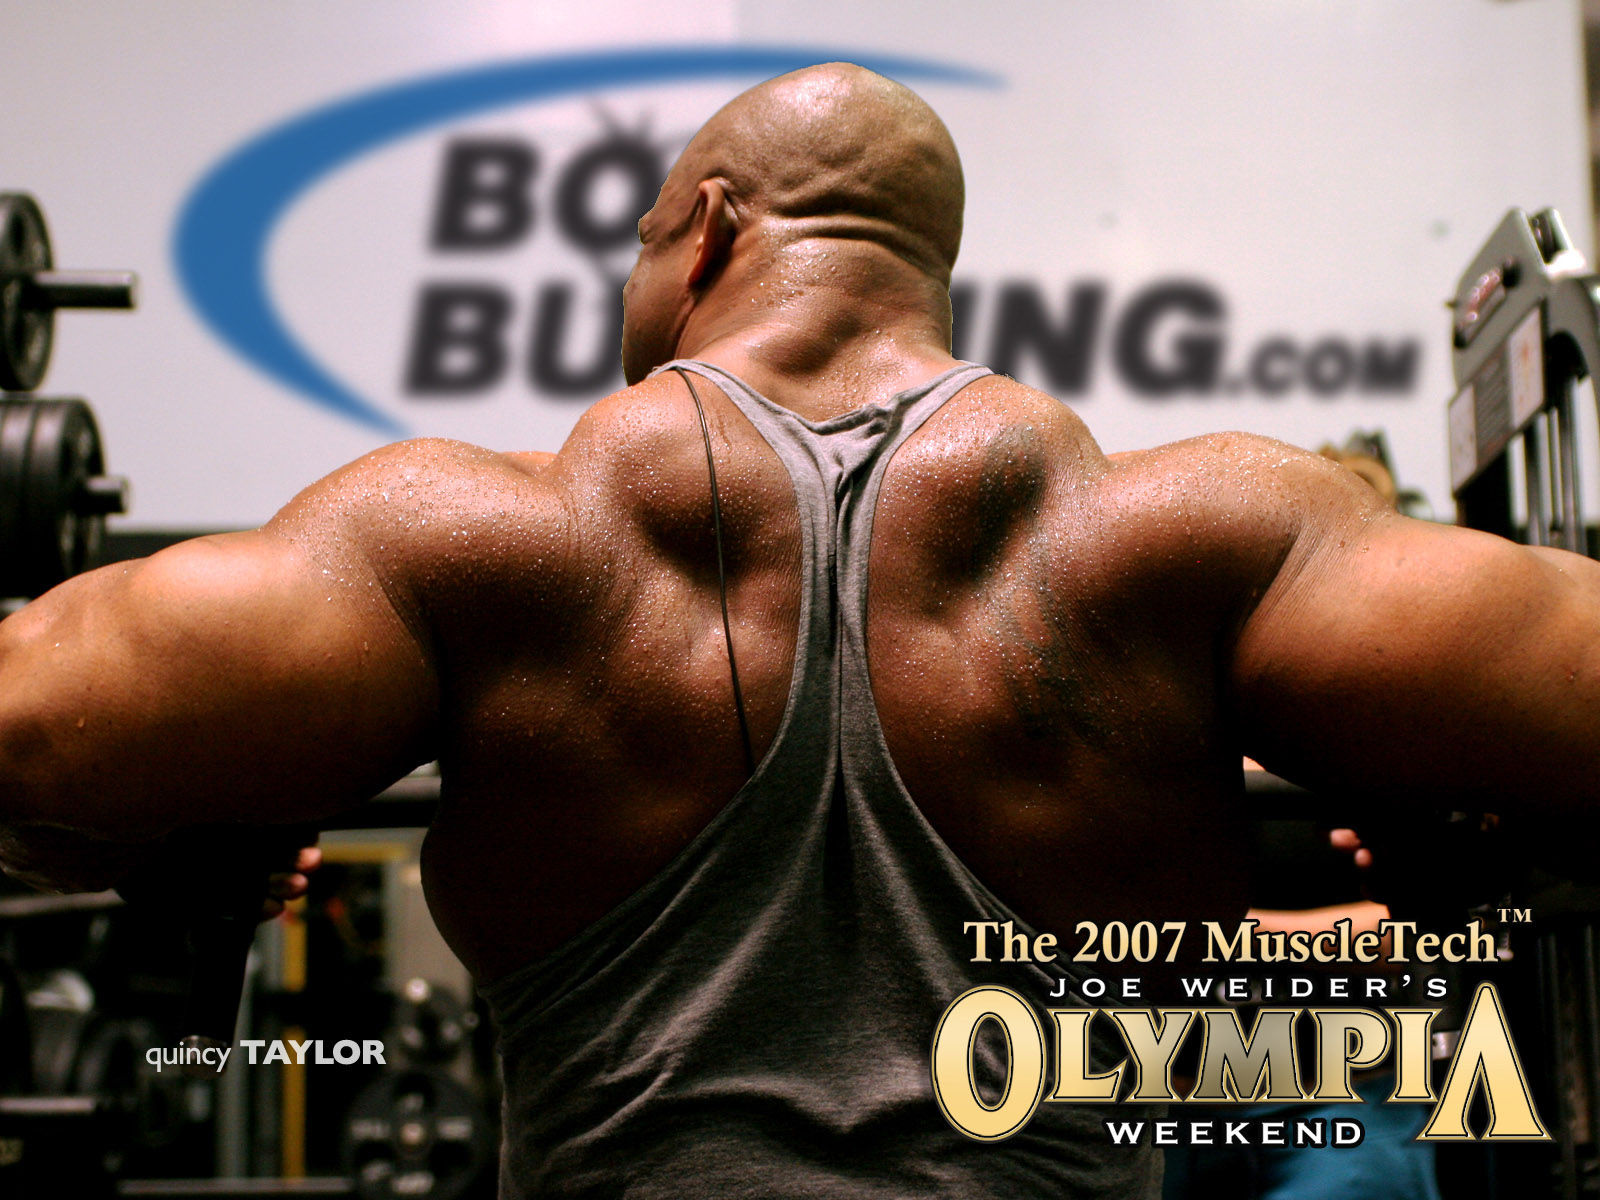 Quincy Taylor Wallpaper Thanks to Loctus and Bodybuilding com